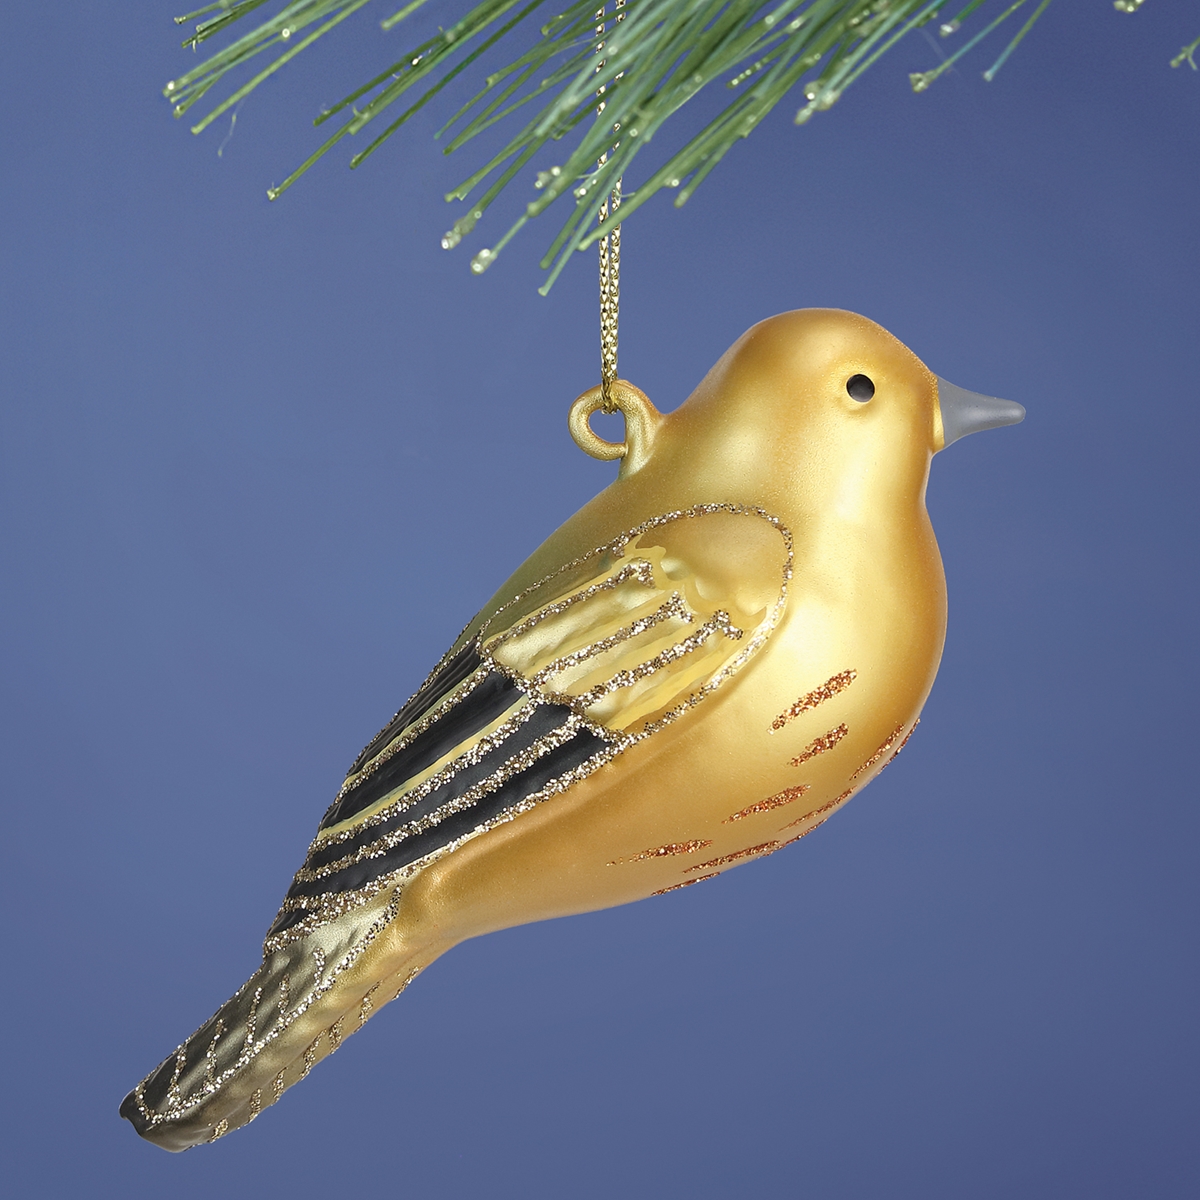 Yellow Warbler Glass Ornament